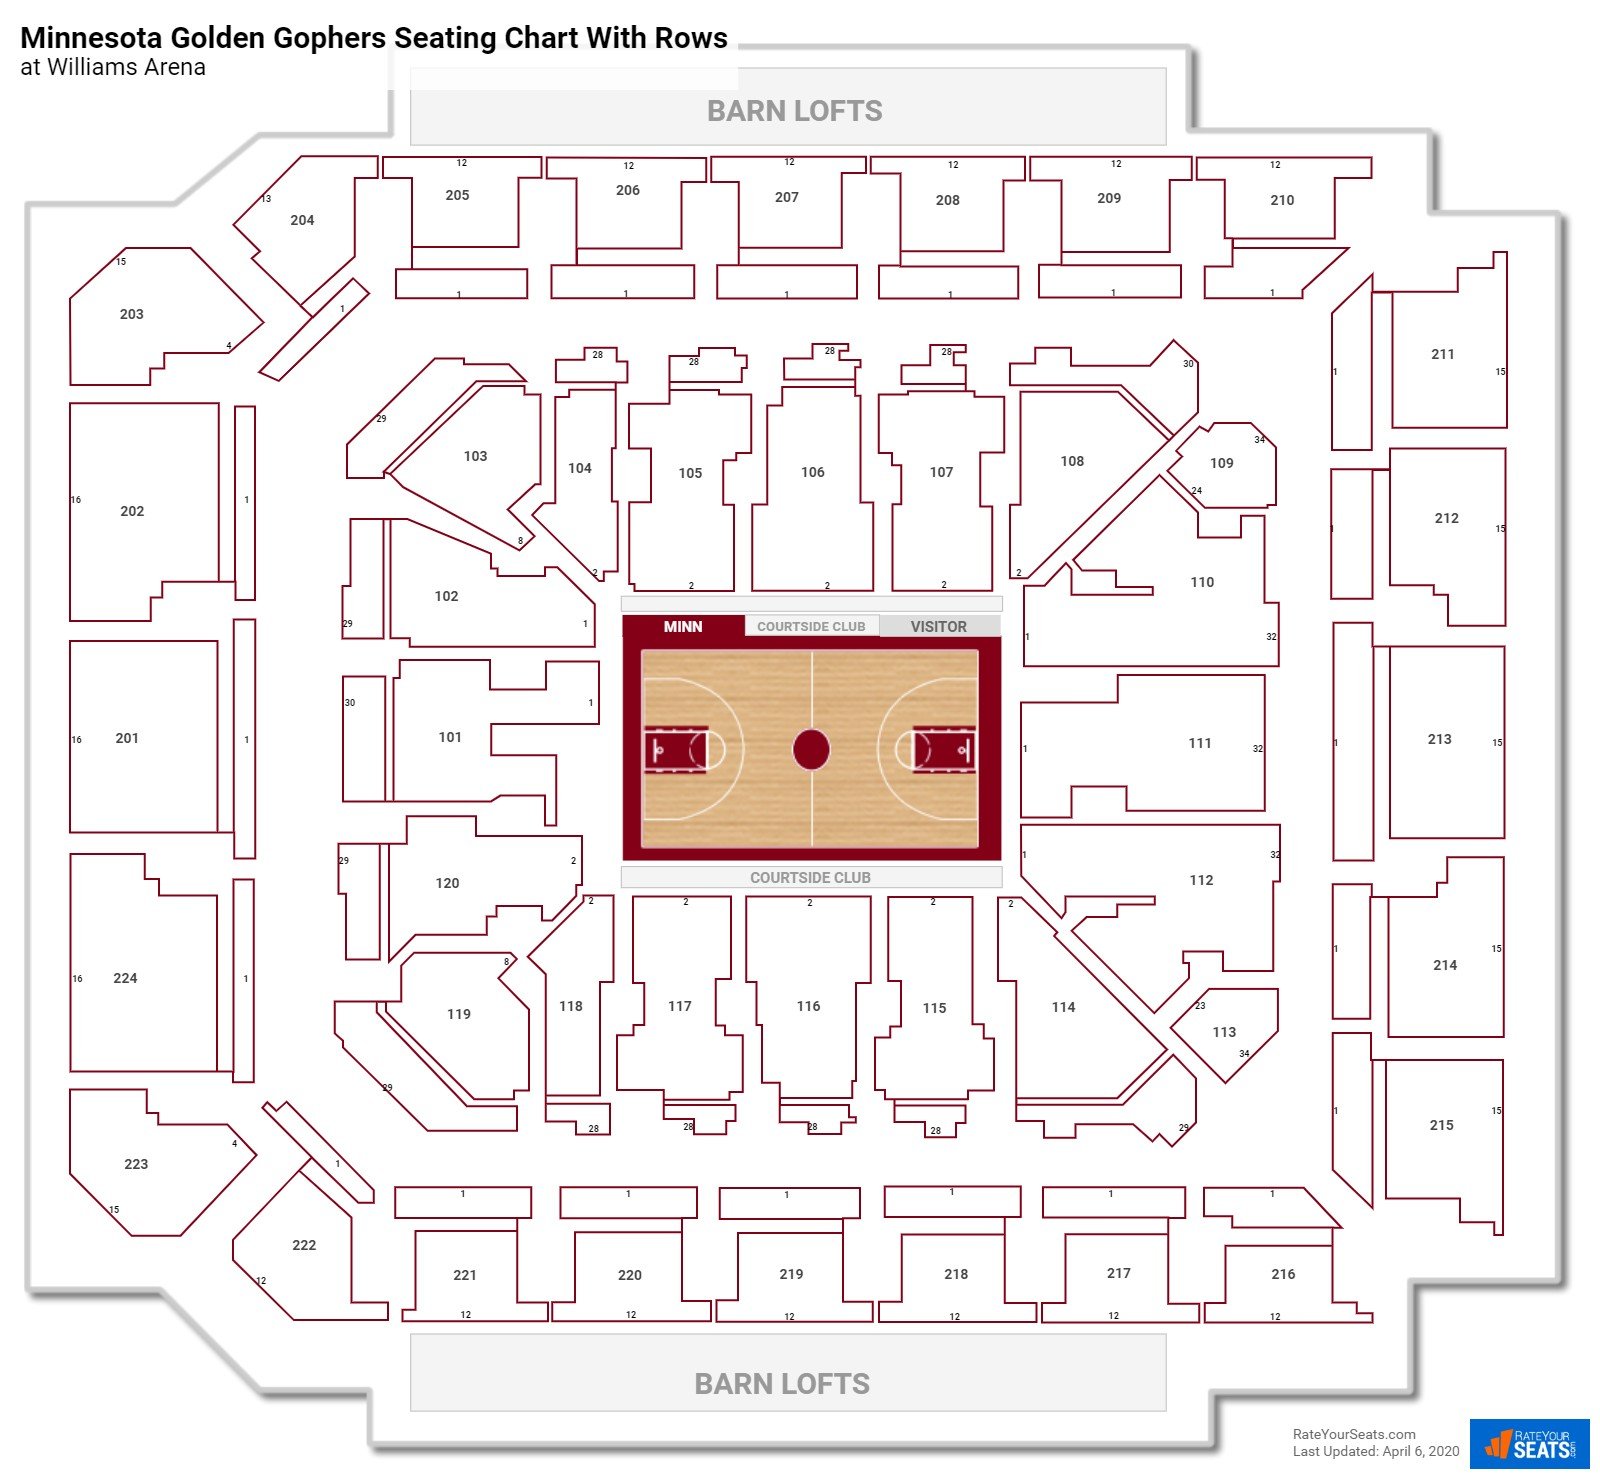 Williams Arena (Minnesota) seating chart with row numbers